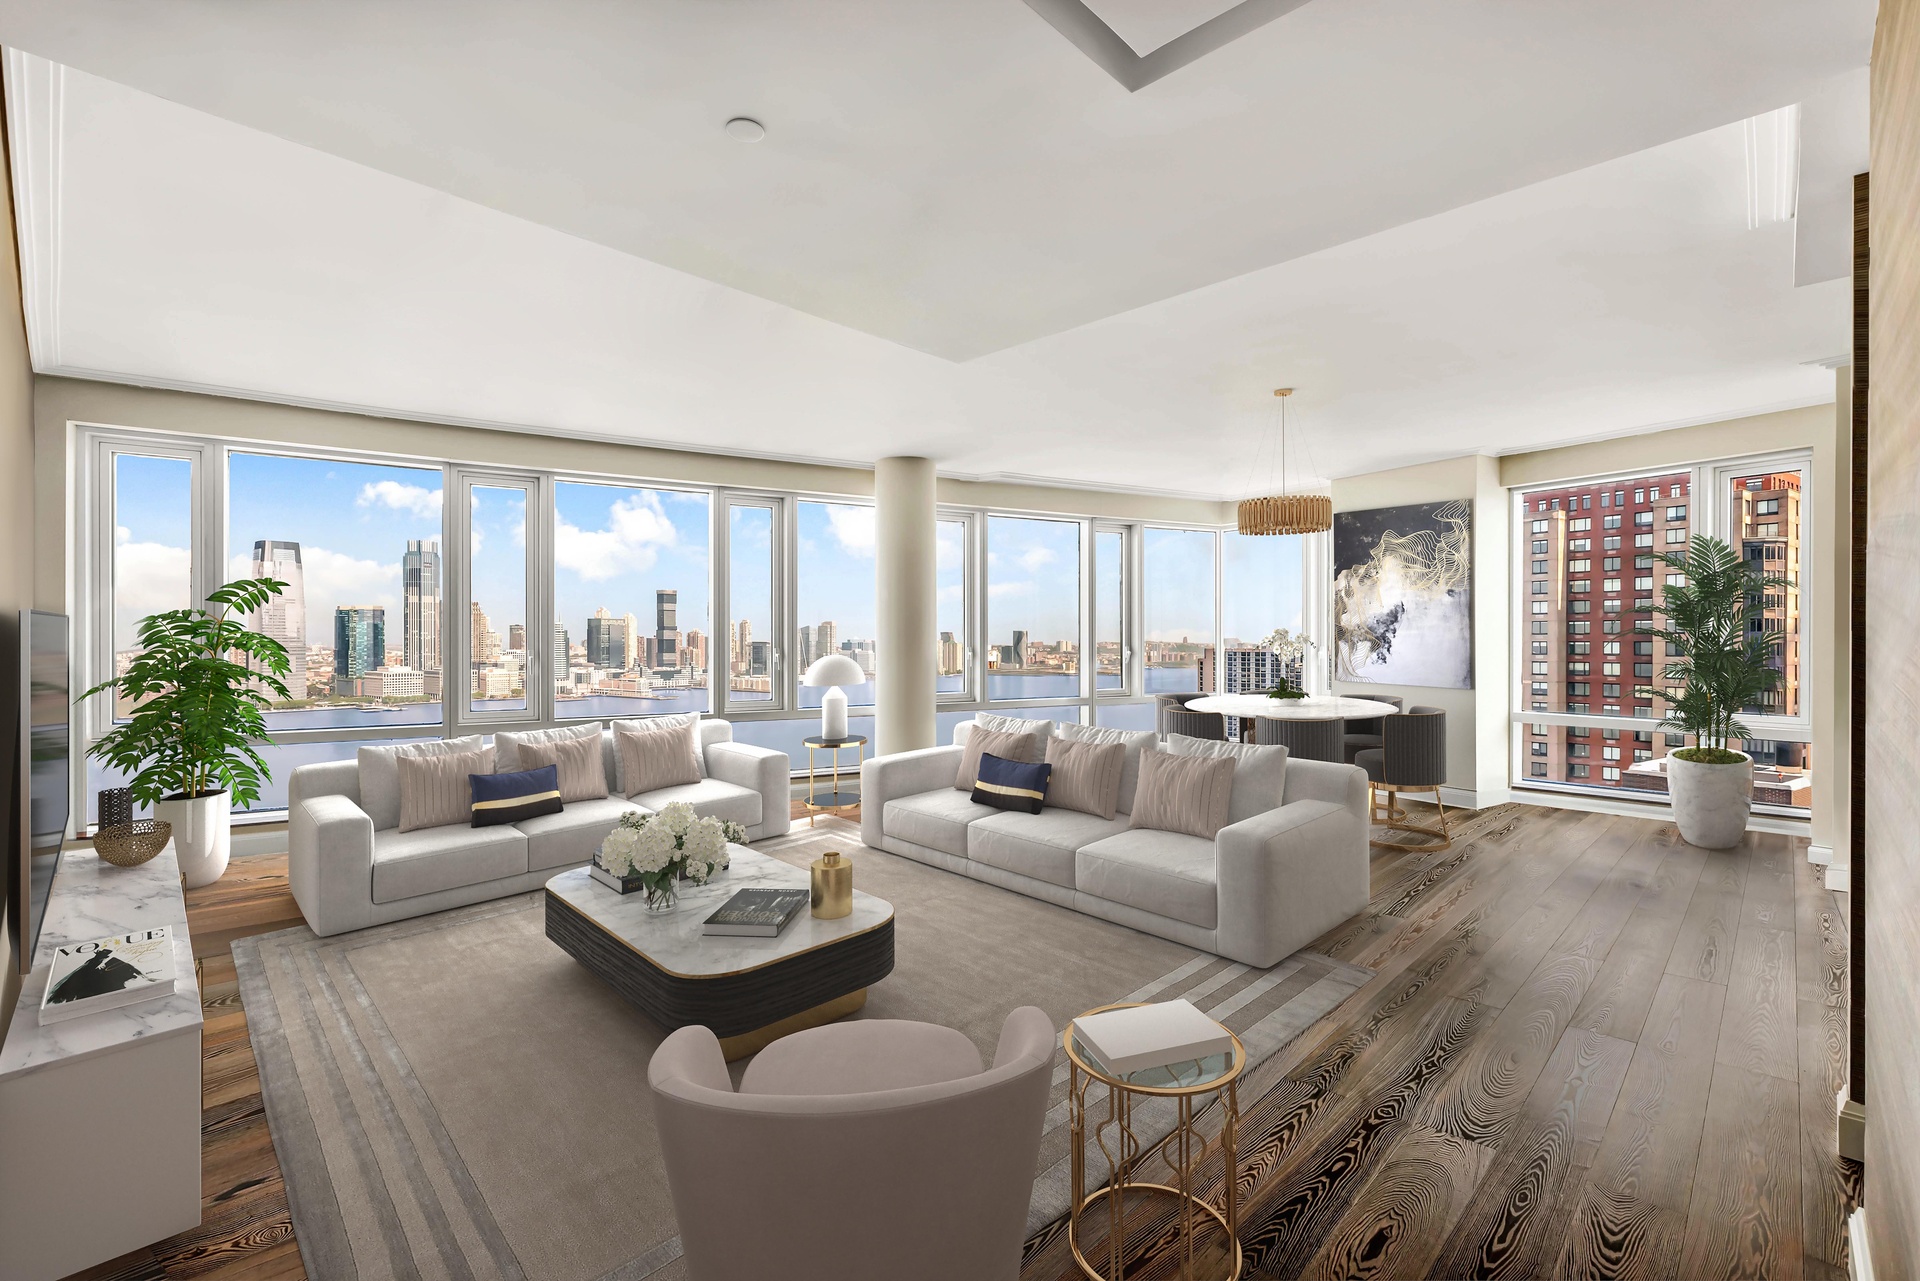 70 Little West Street 32-Ab, Battery Park City, Downtown, NYC - 6 Bedrooms  
5 Bathrooms  
8 Rooms - 